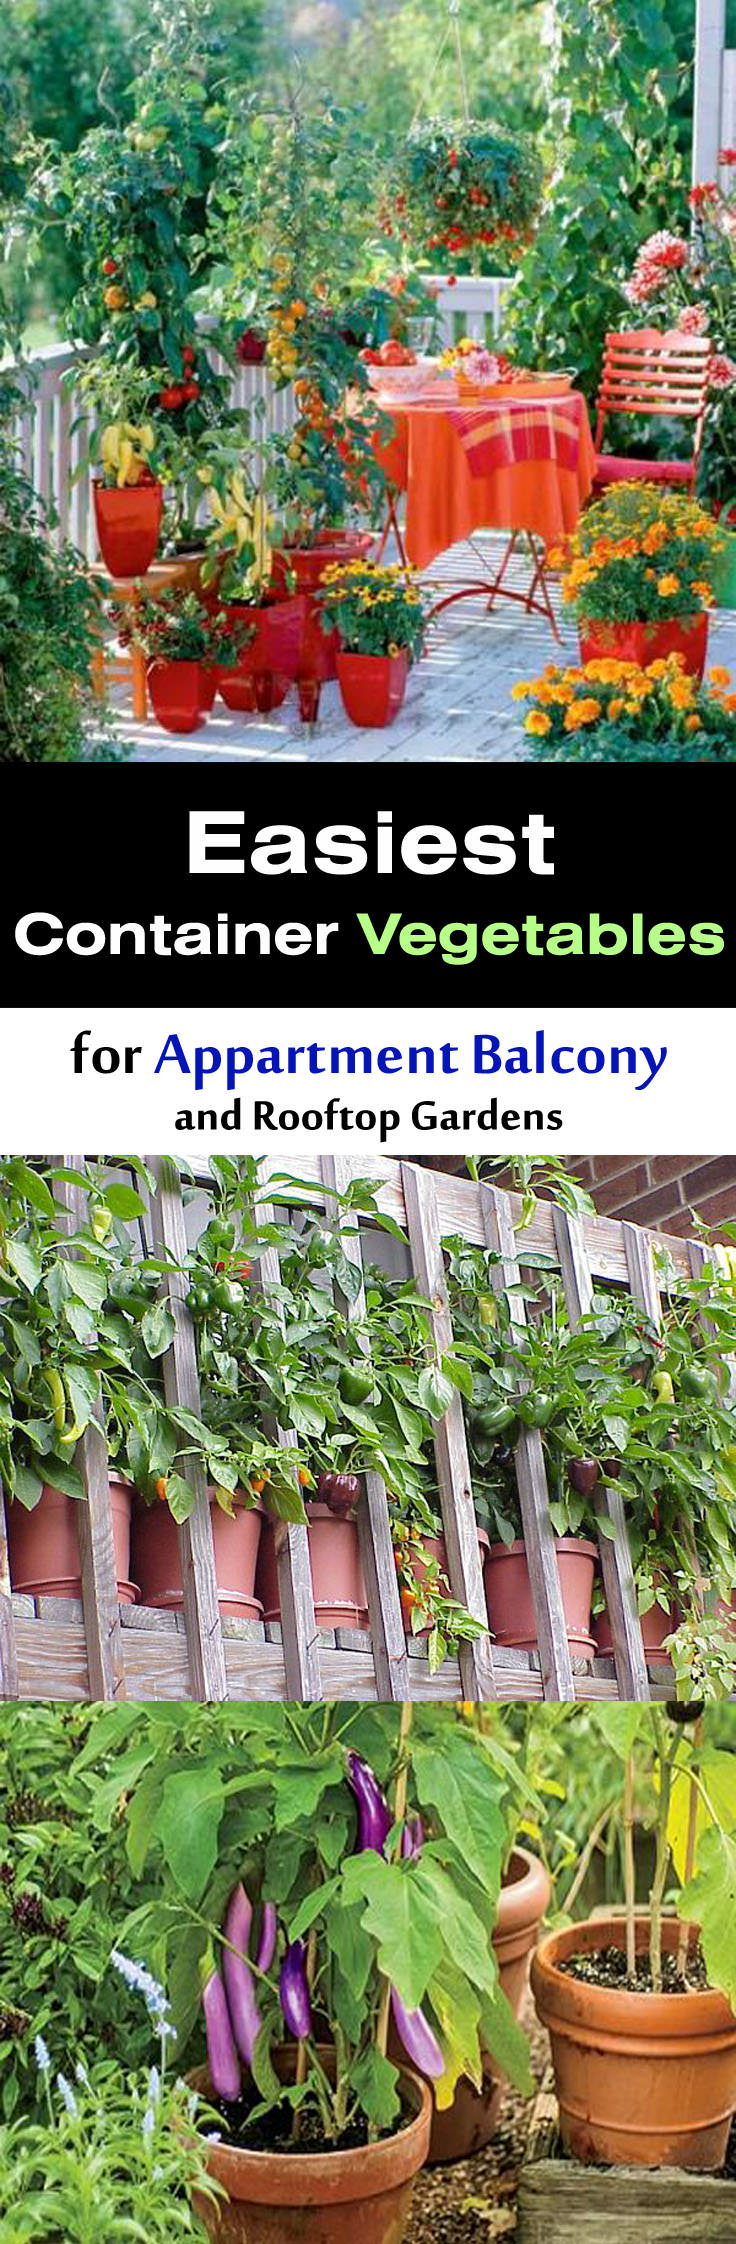 Easy Container Vegetables for Balcony & Rooftop Garden | Container ...